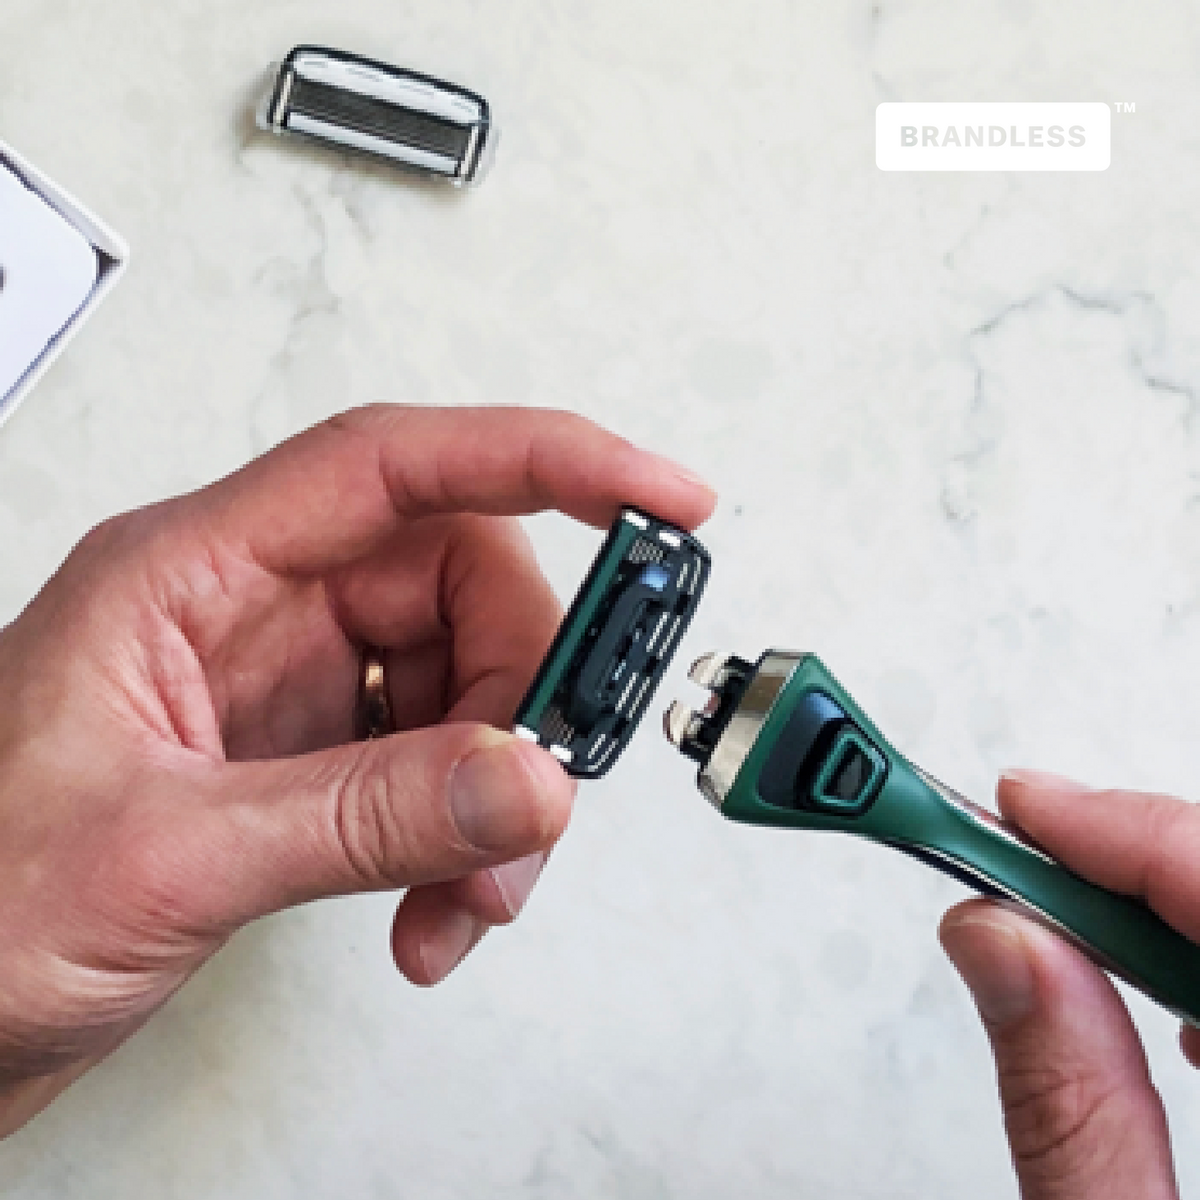 Lifestyle photo, man assembling the razor by clicking the weighted handle into the back of the razor cartridge for face, background is a white marble bathroom countertop, brandless logo.